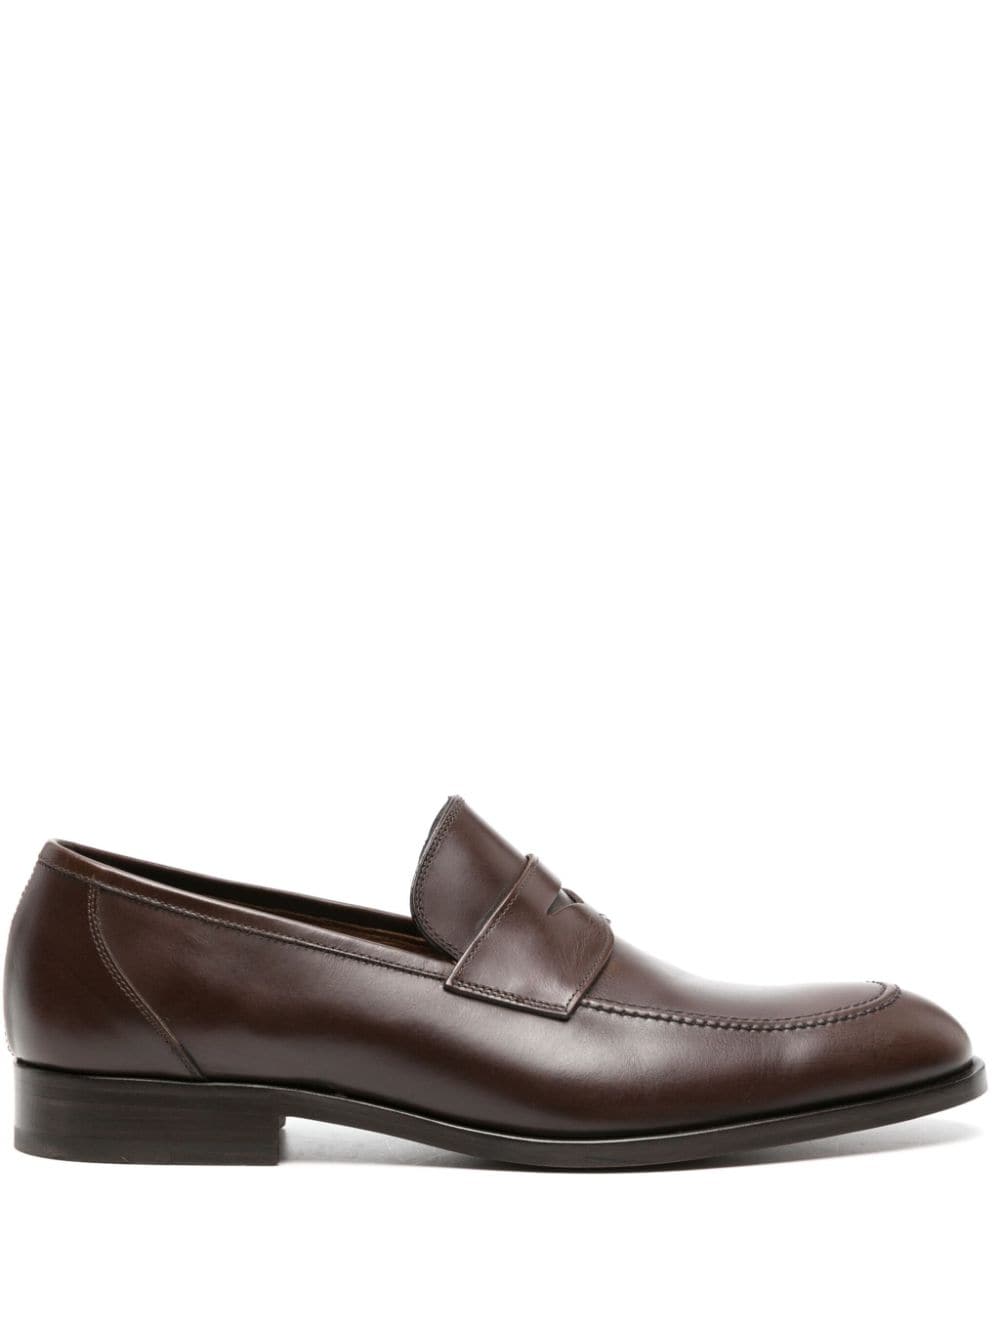 Fratelli Rossetti Penny-slot Polished Leather Loafers In Brown